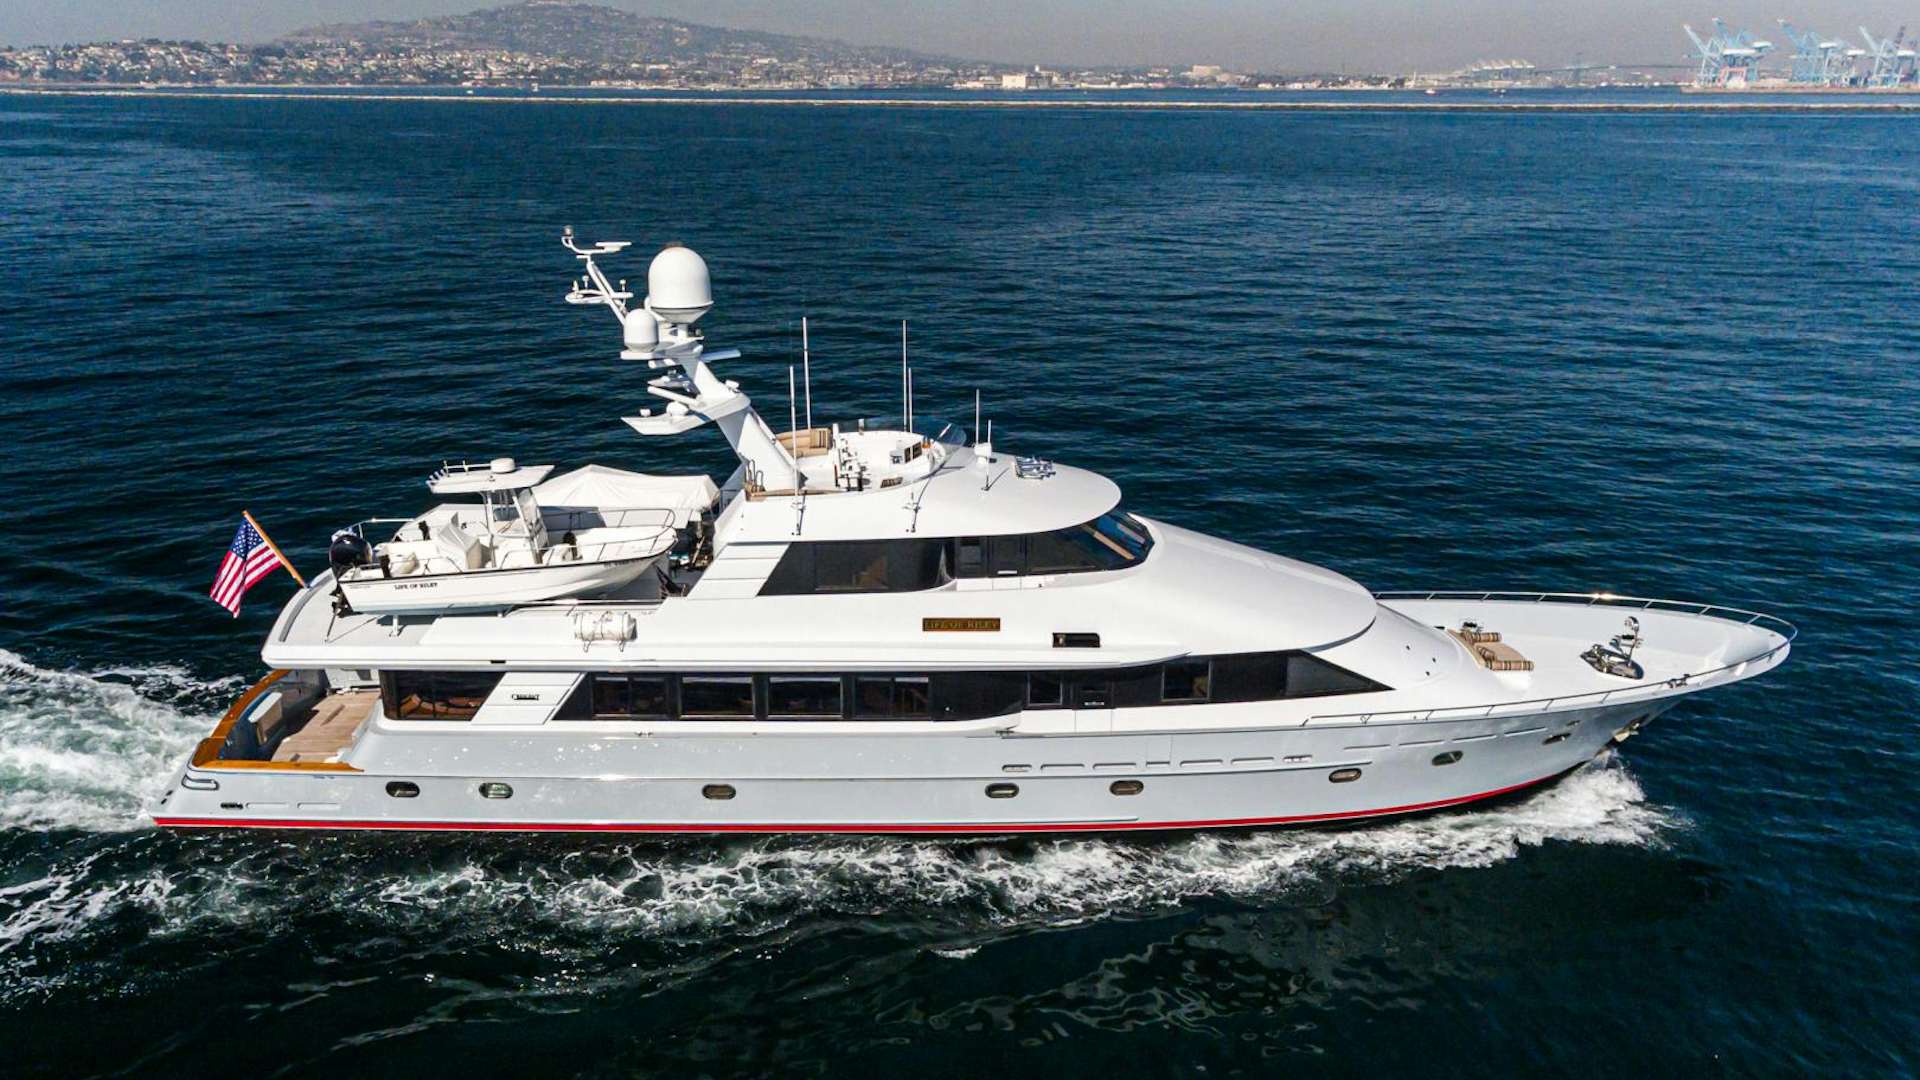 Watch Video for COLUMBUS Yacht for Sale